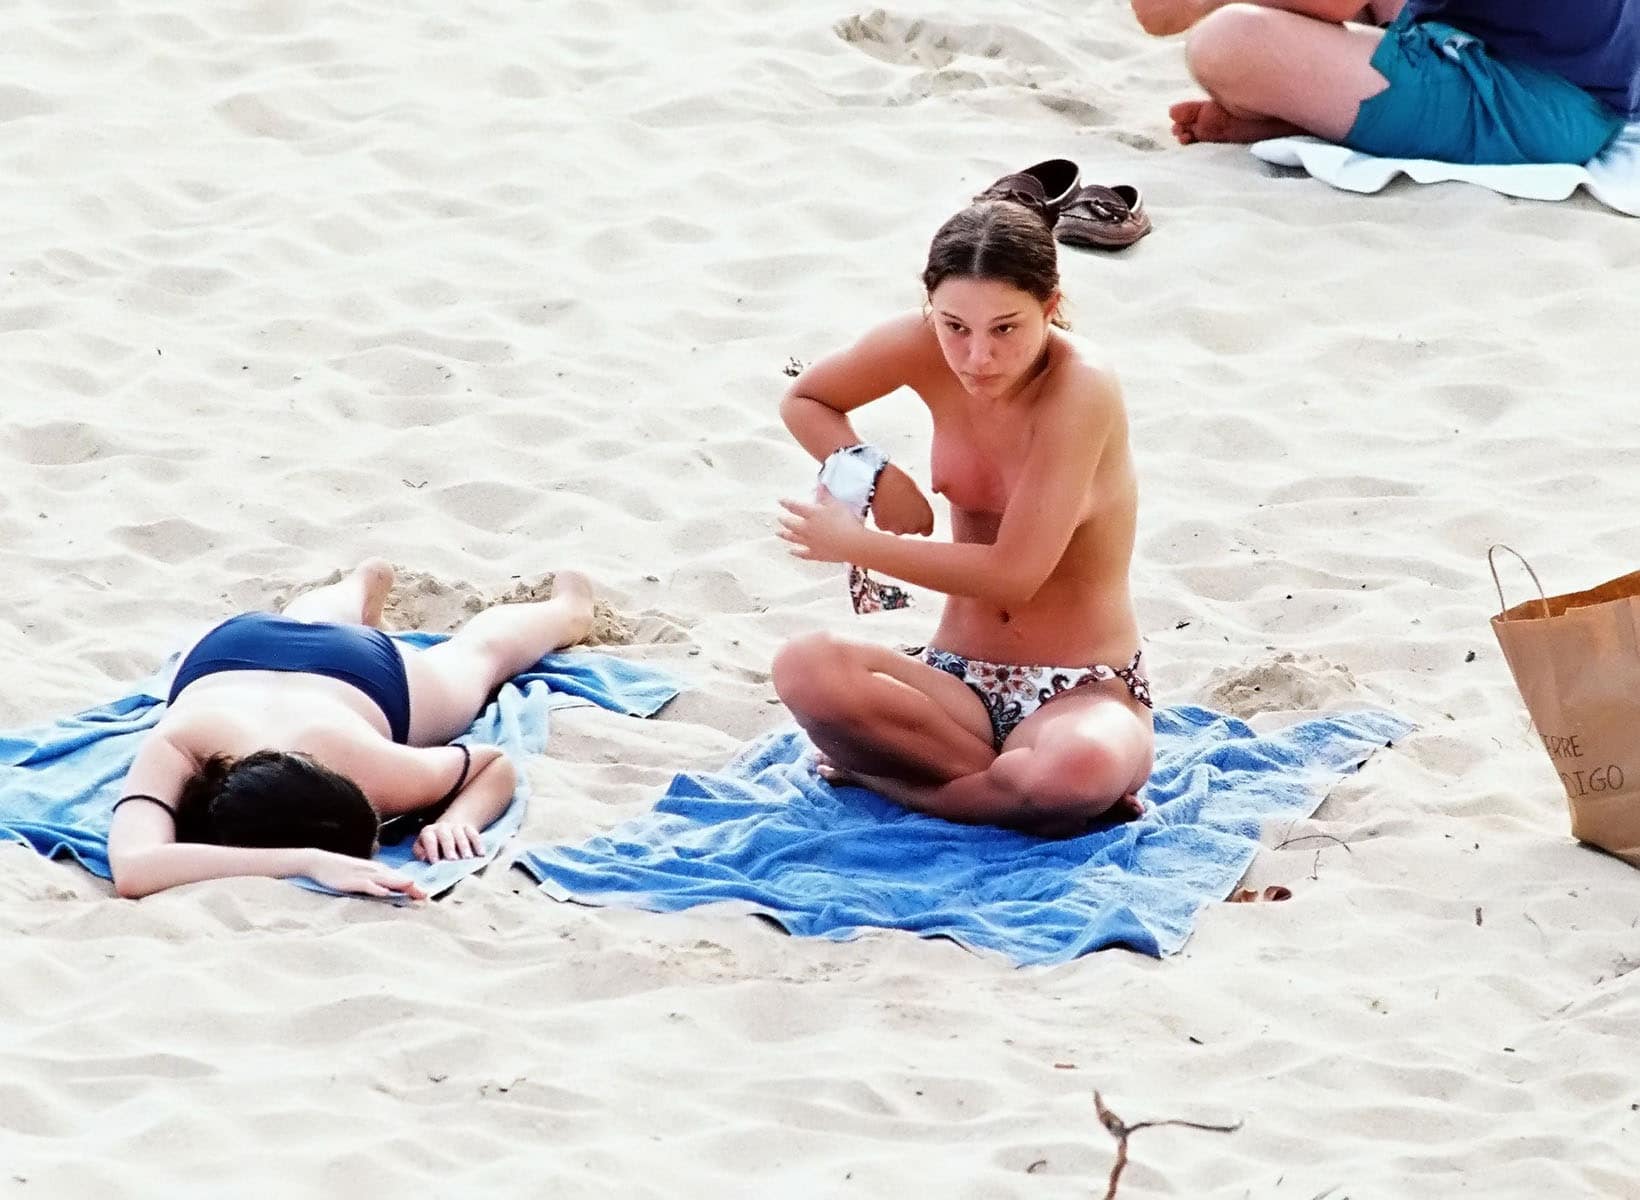 celeb Natalie Portman taking her top off at the beach